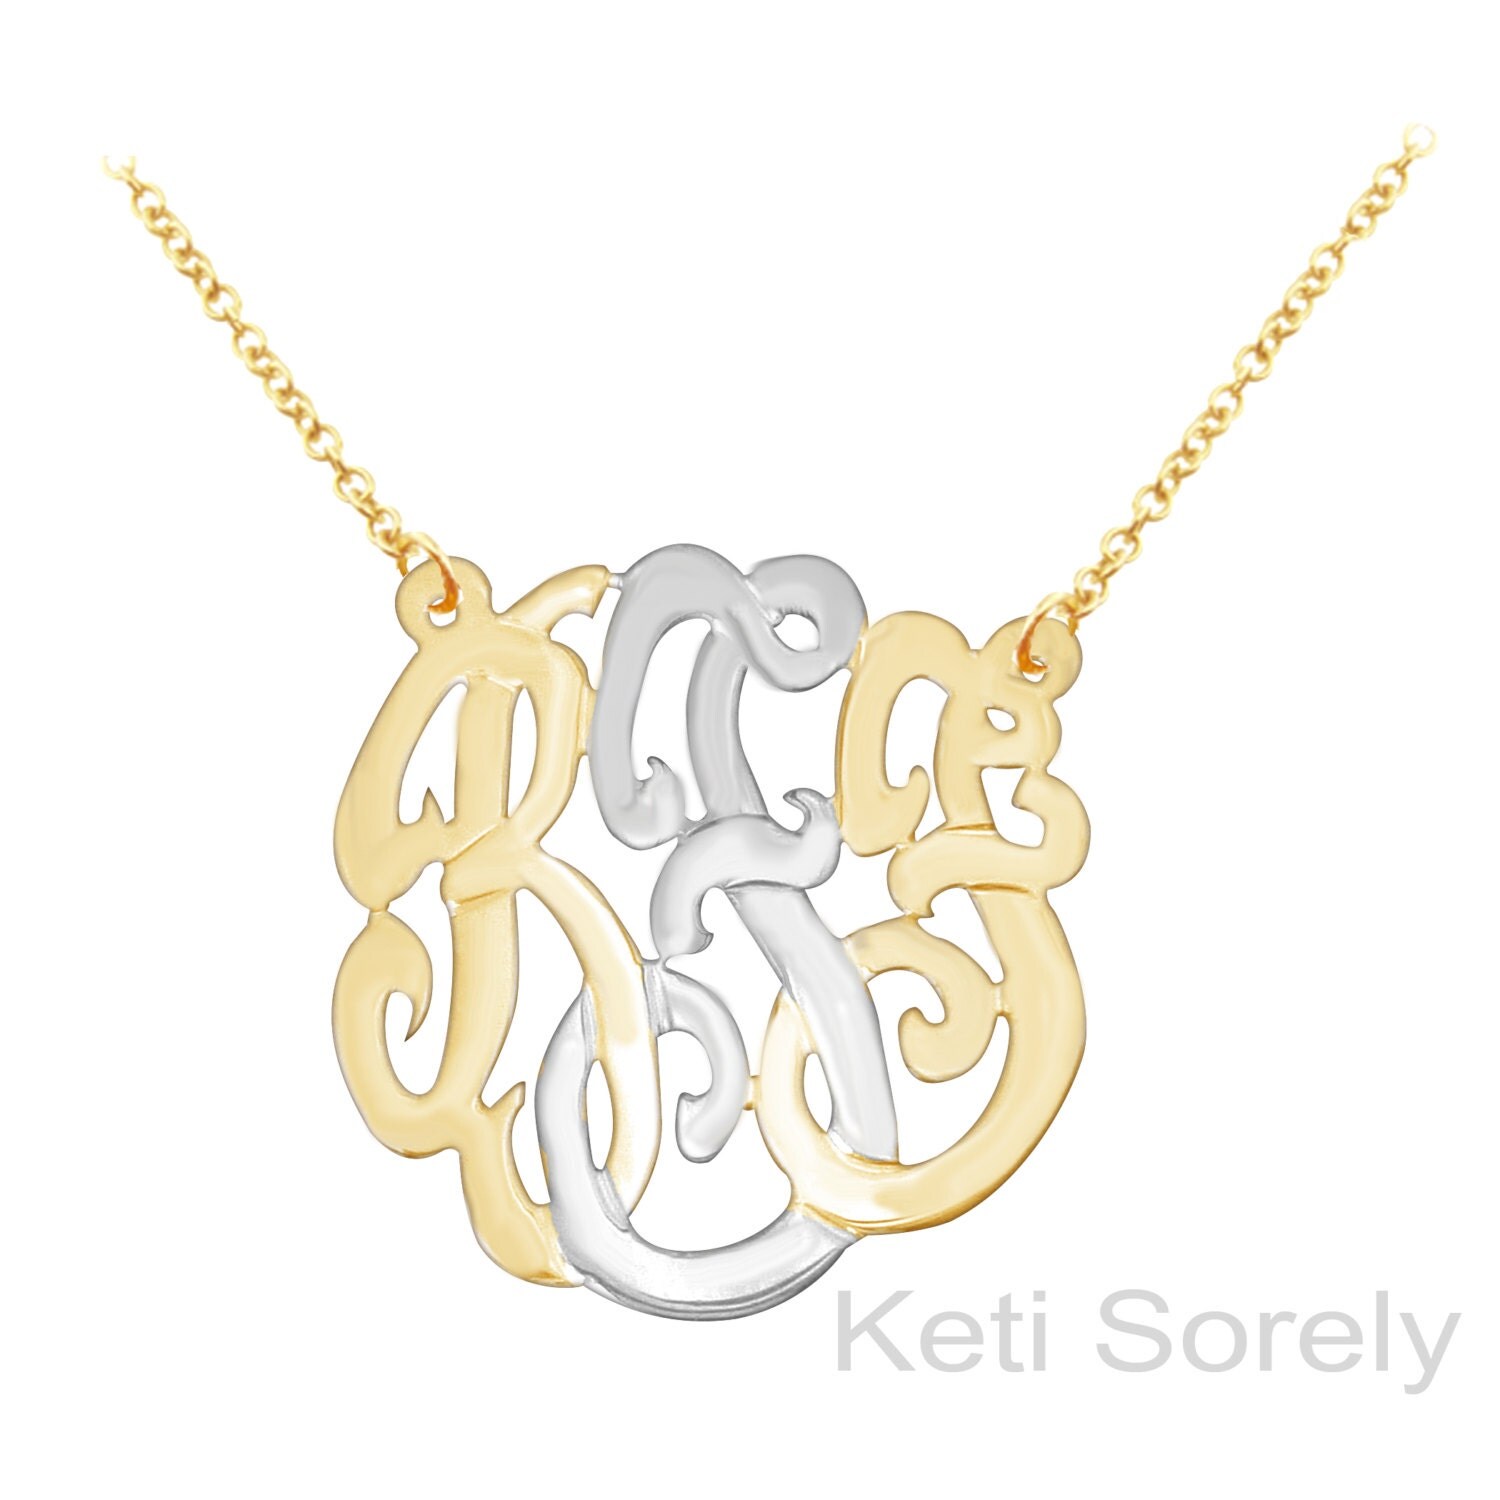 Monogram Necklace Personalized Initials Necklace in Two Tone